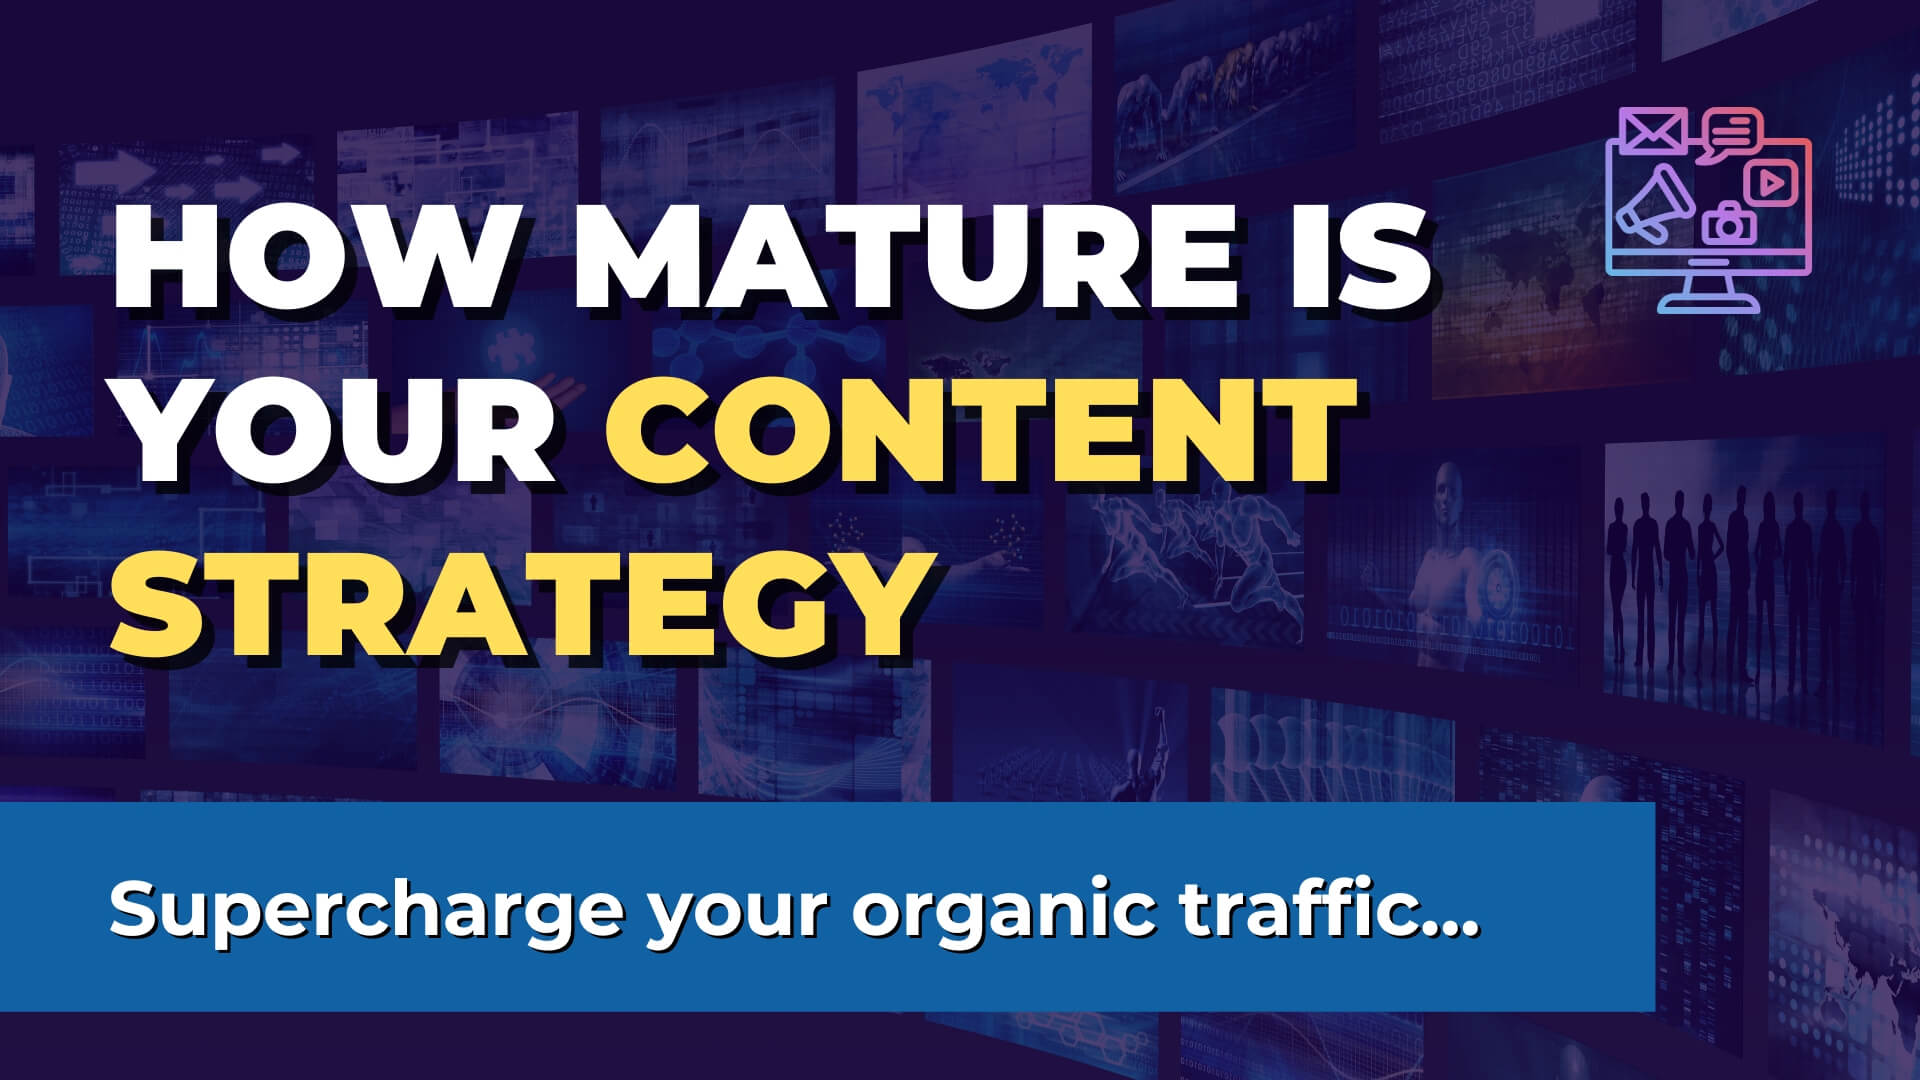 Image that says "How mature is your content strategy"